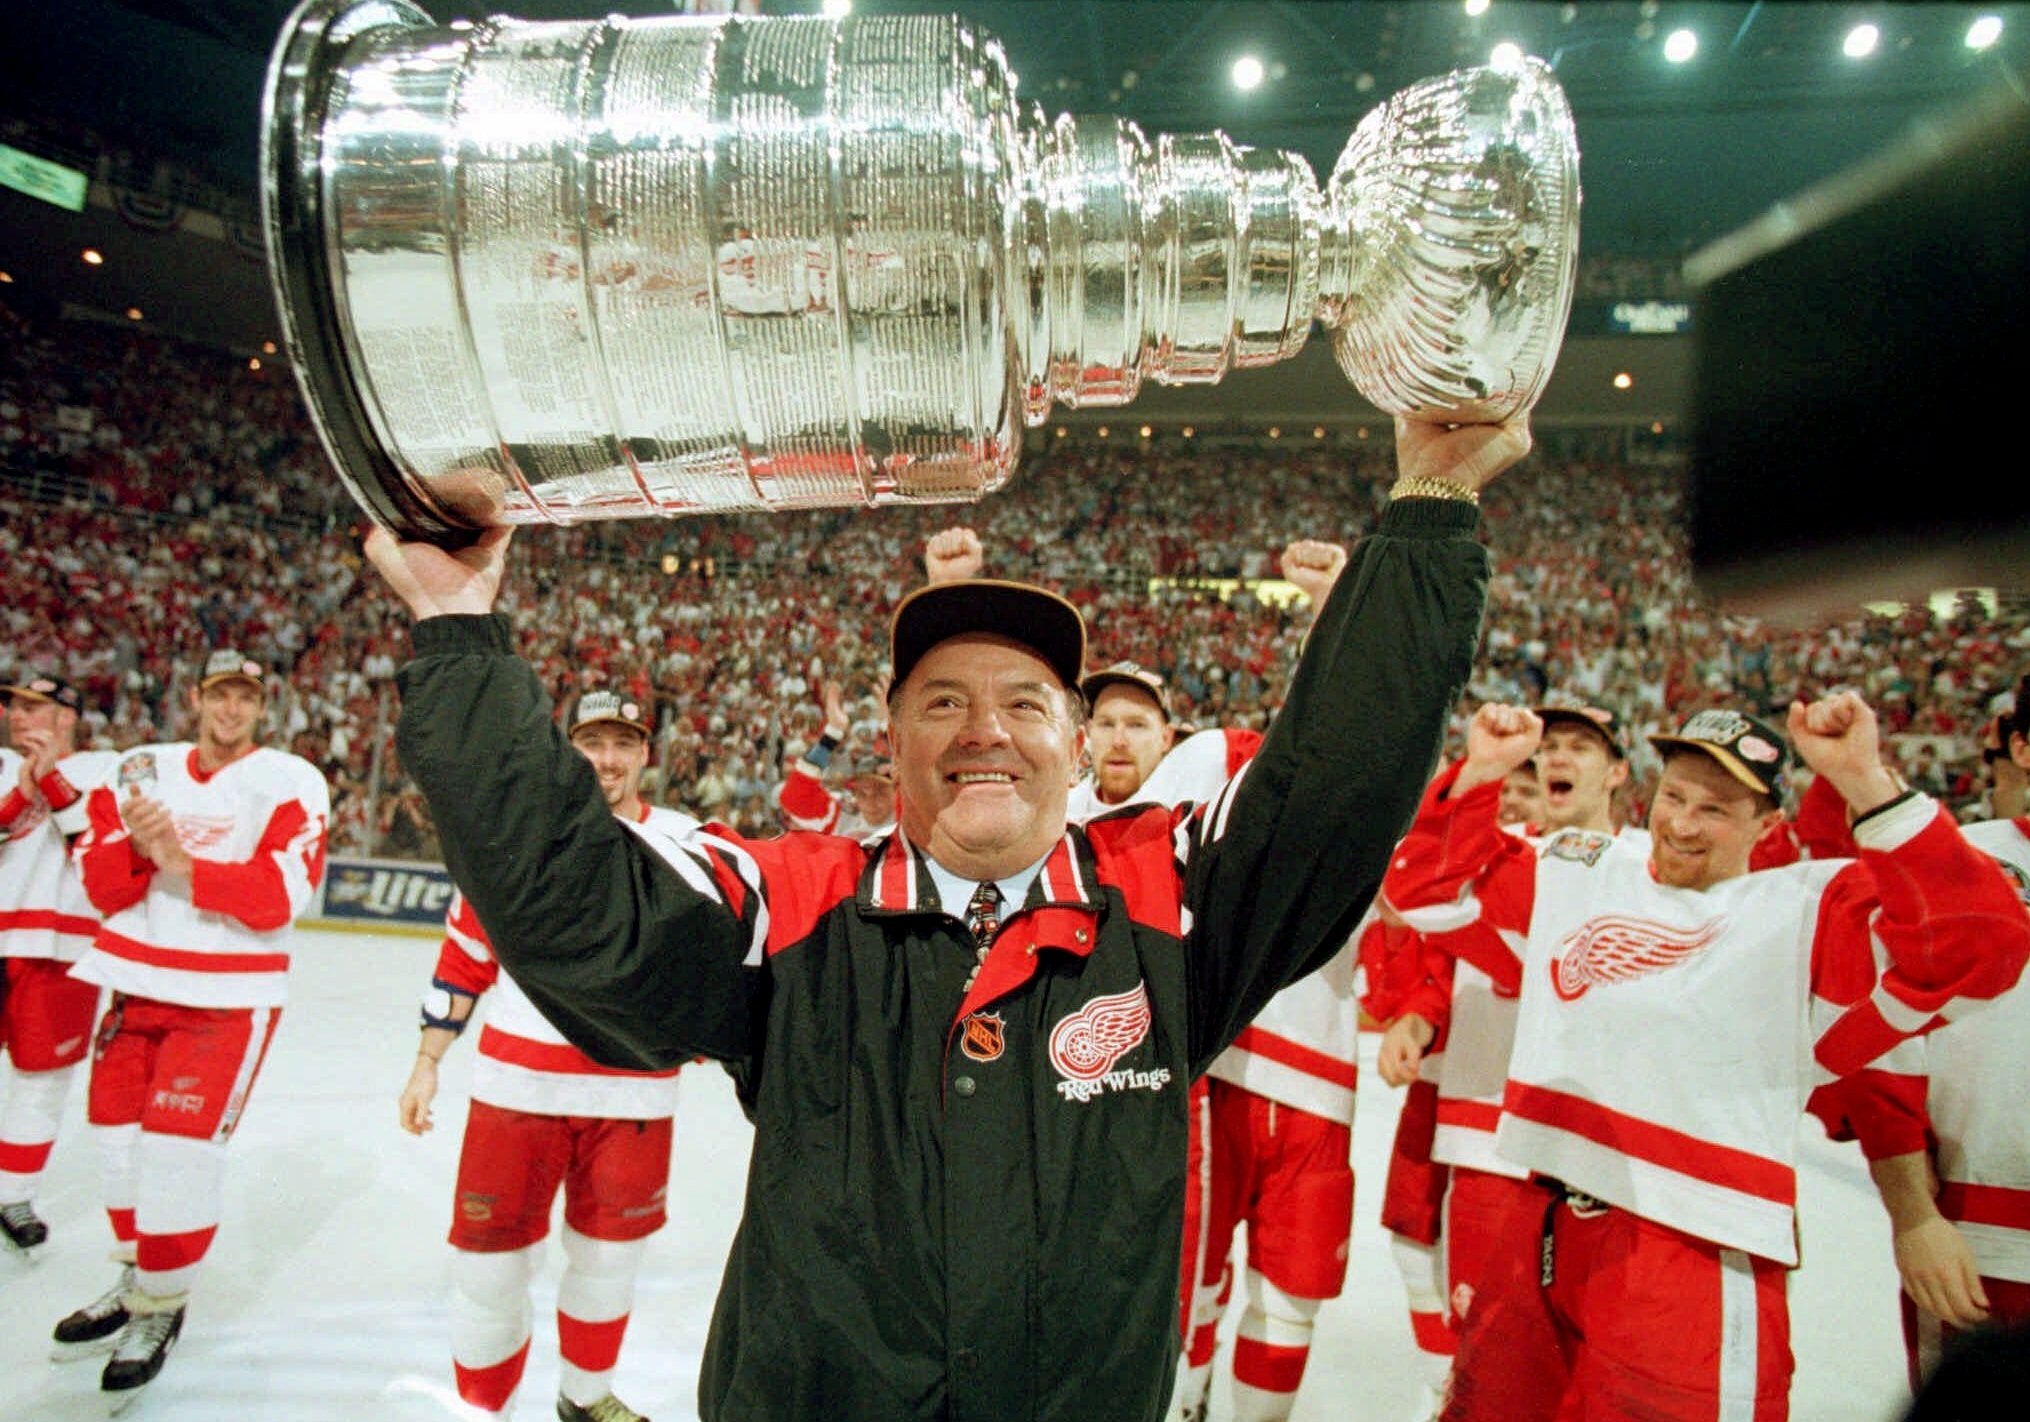 Welcome Back, Stanley! Detroit Red Wings win Stanley Cup!!